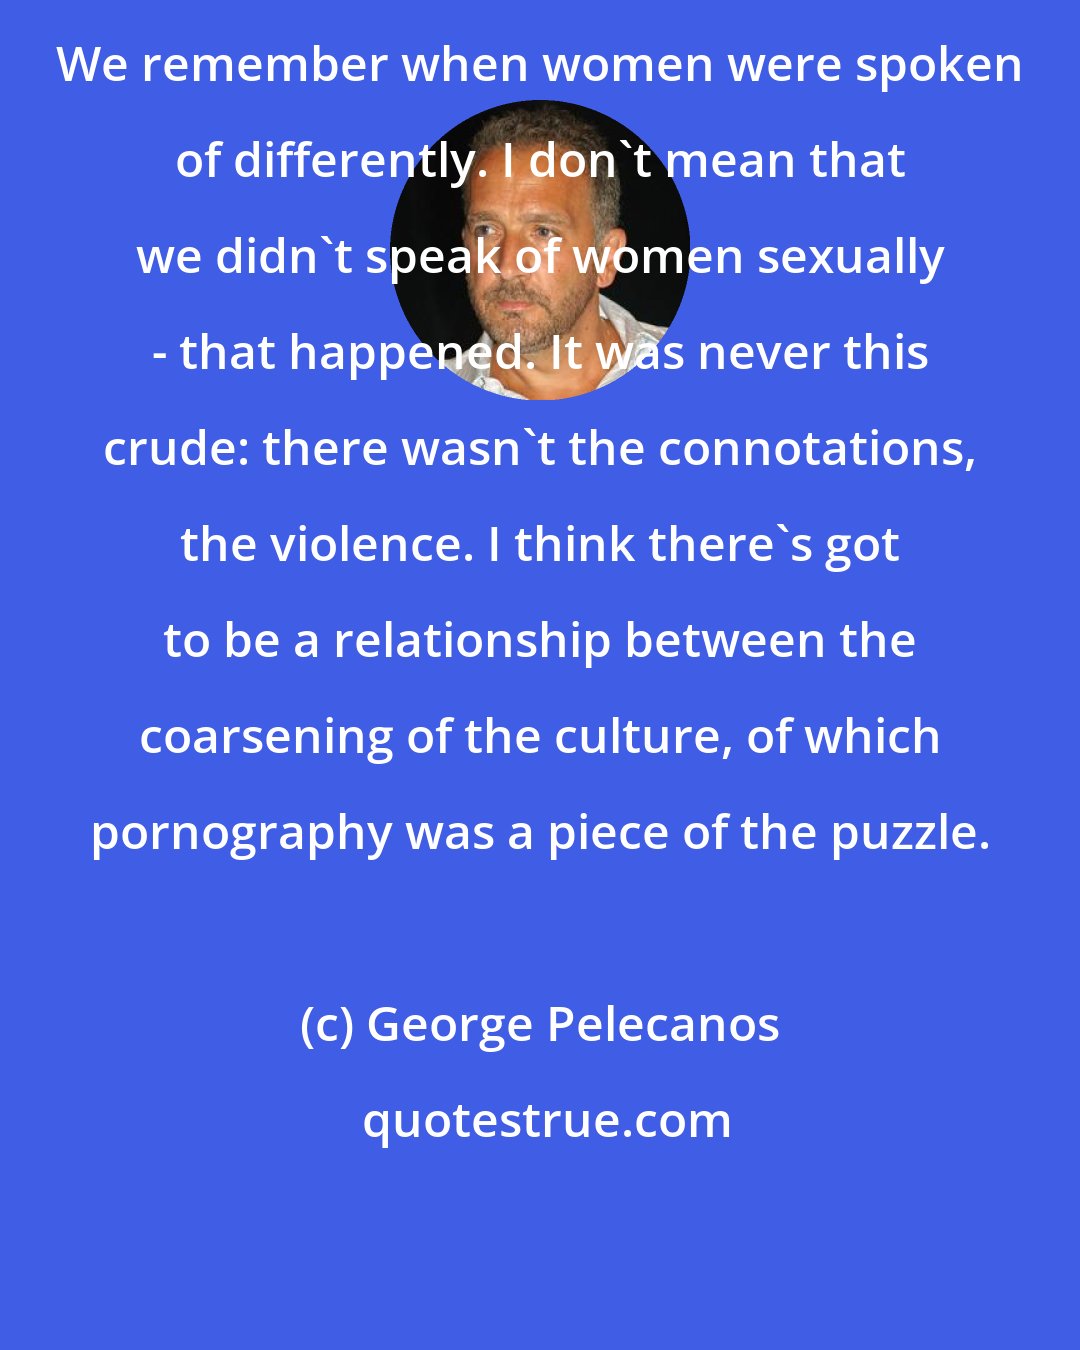 George Pelecanos: We remember when women were spoken of differently. I don't mean that we didn't speak of women sexually - that happened. It was never this crude: there wasn't the connotations, the violence. I think there's got to be a relationship between the coarsening of the culture, of which pornography was a piece of the puzzle.